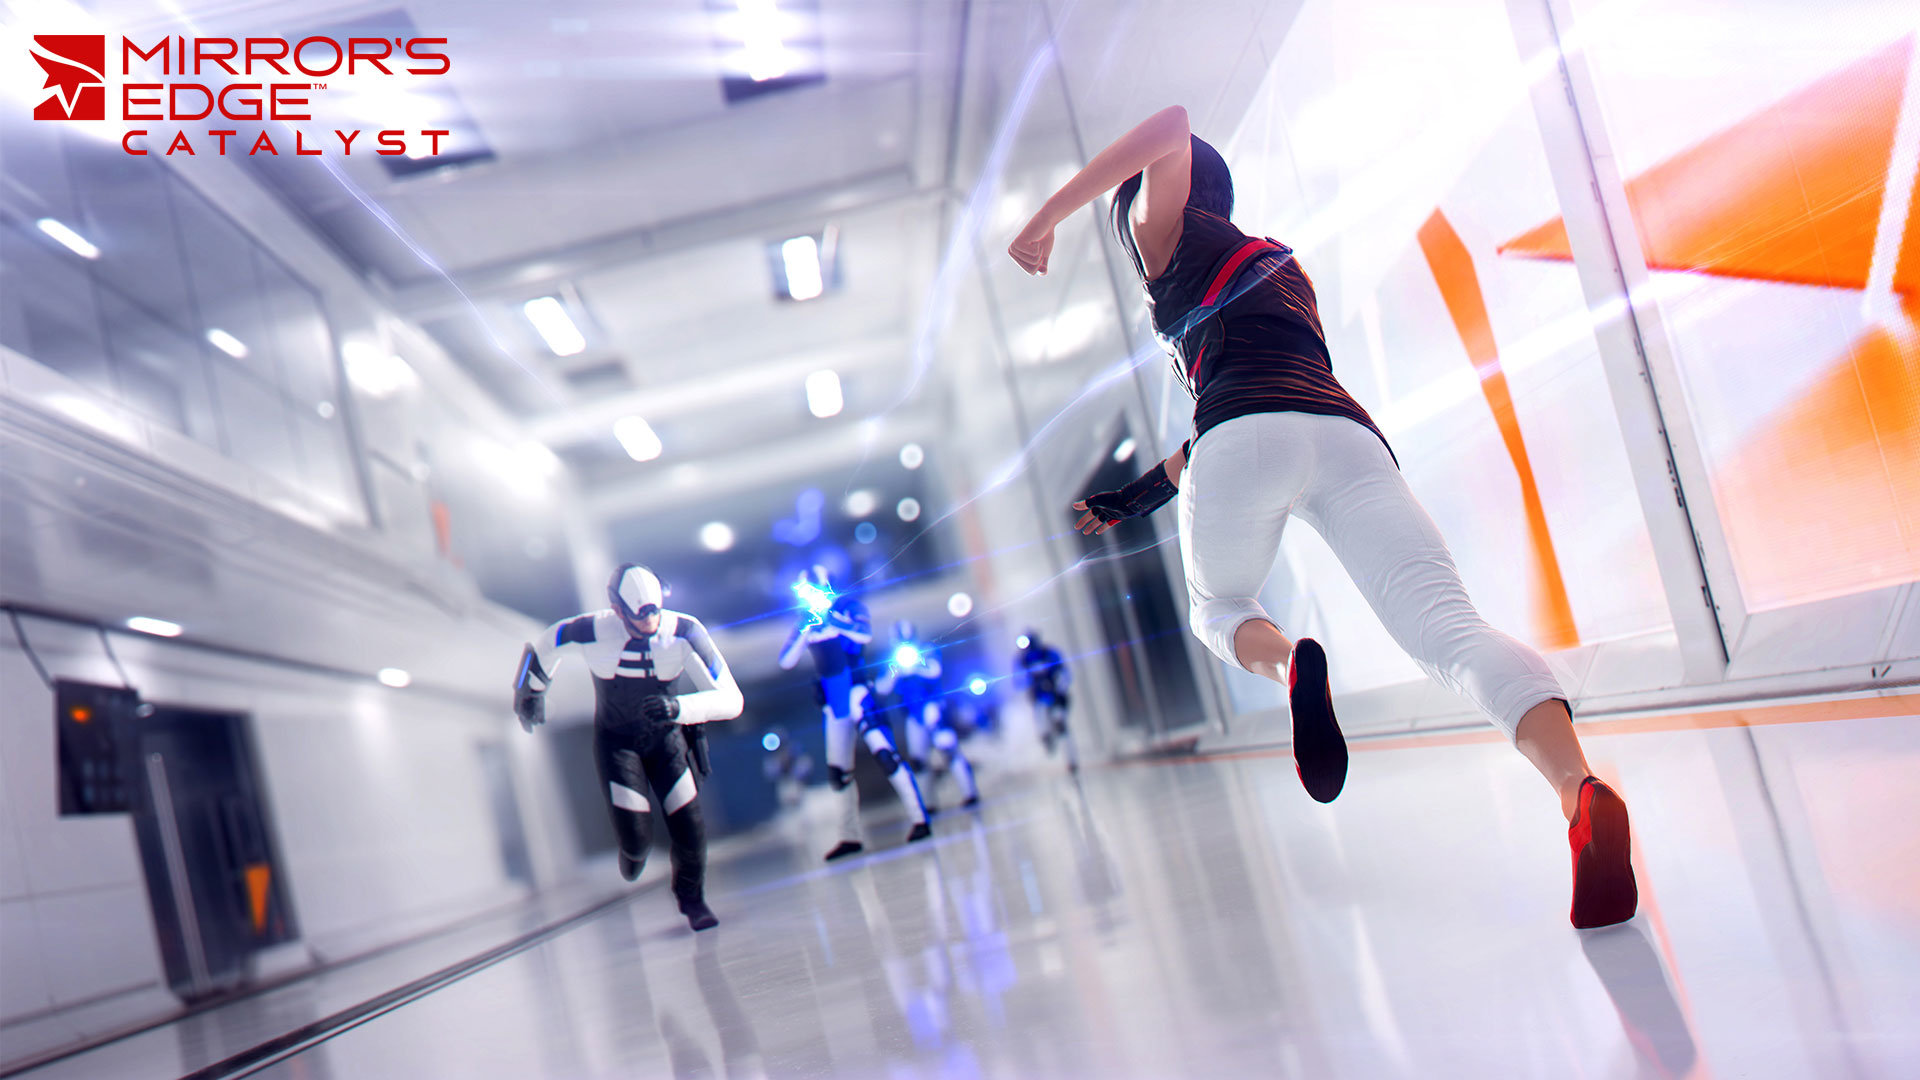 Download full hd 1920x1080 Mirror's Edge Catalyst computer wallpaper ID:219509 for free